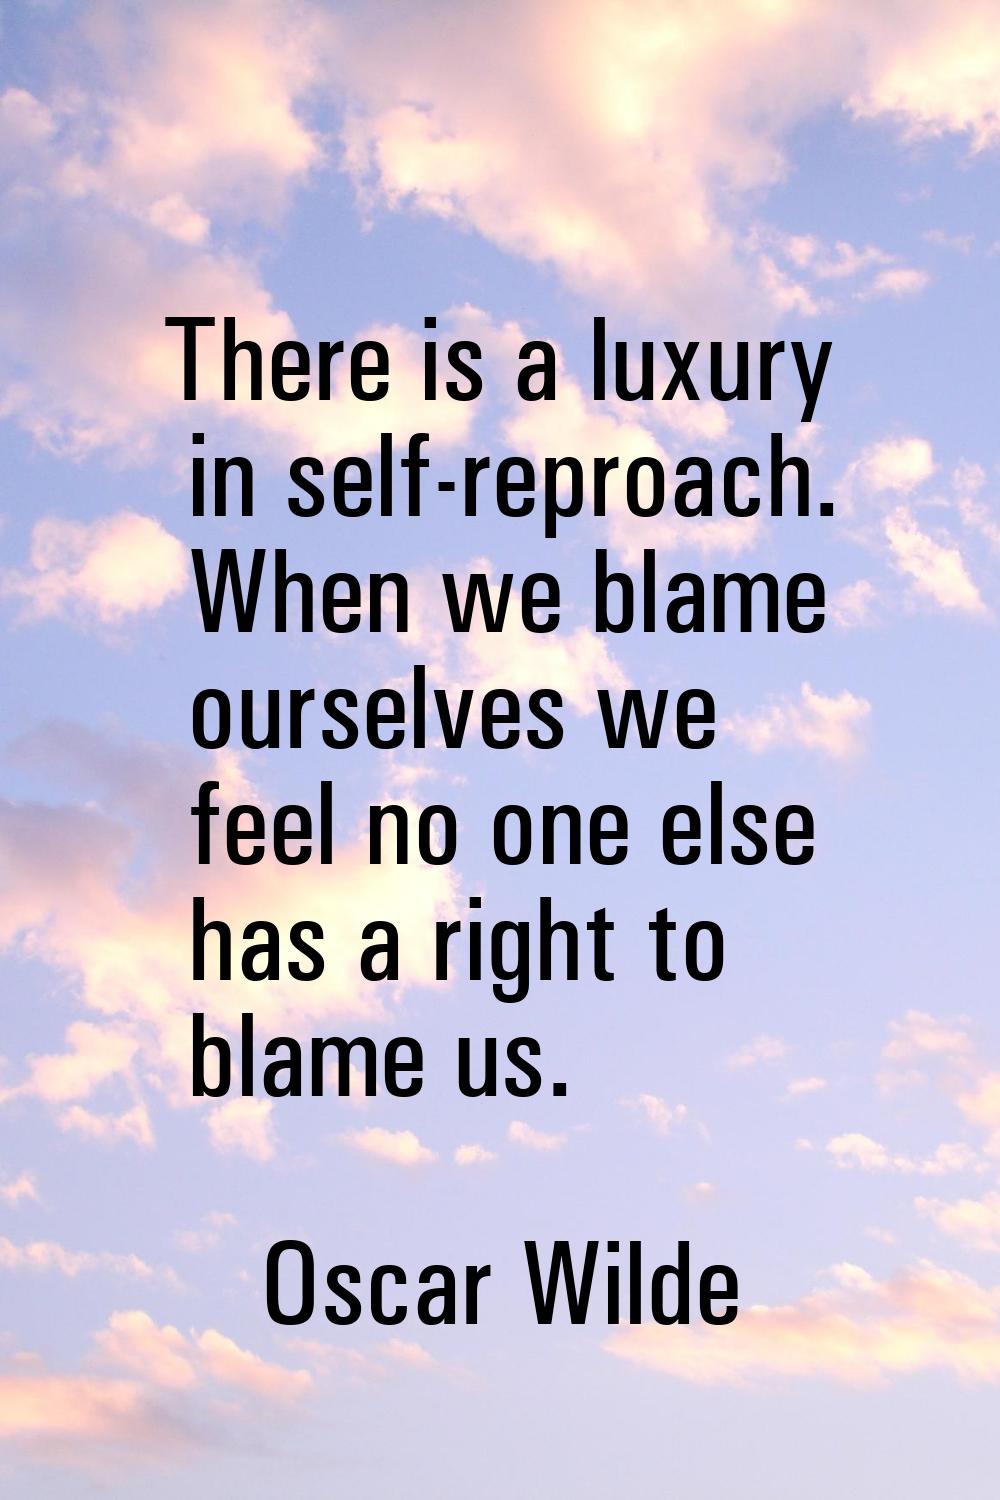 There is a luxury in self-reproach. When we blame ourselves we feel no one else has a right to blam